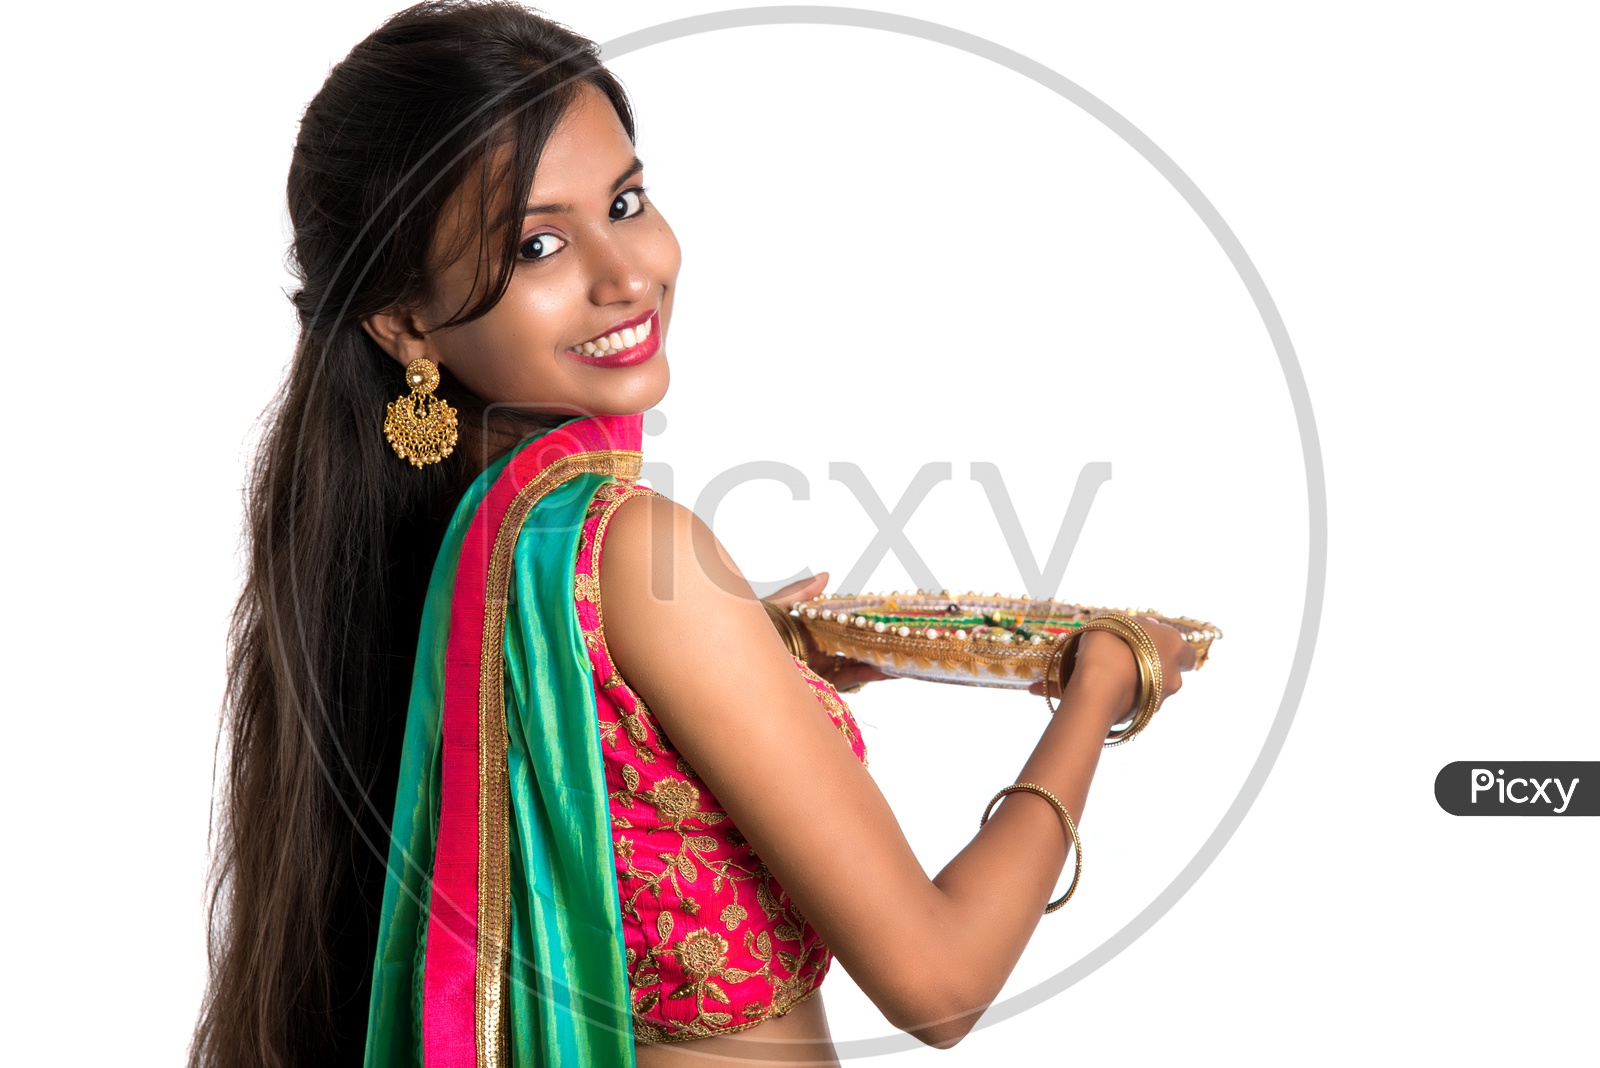 Beautiful Traditional Indian Woman Holding Dia Thali Or Dia Plate In Hand With Smile Face